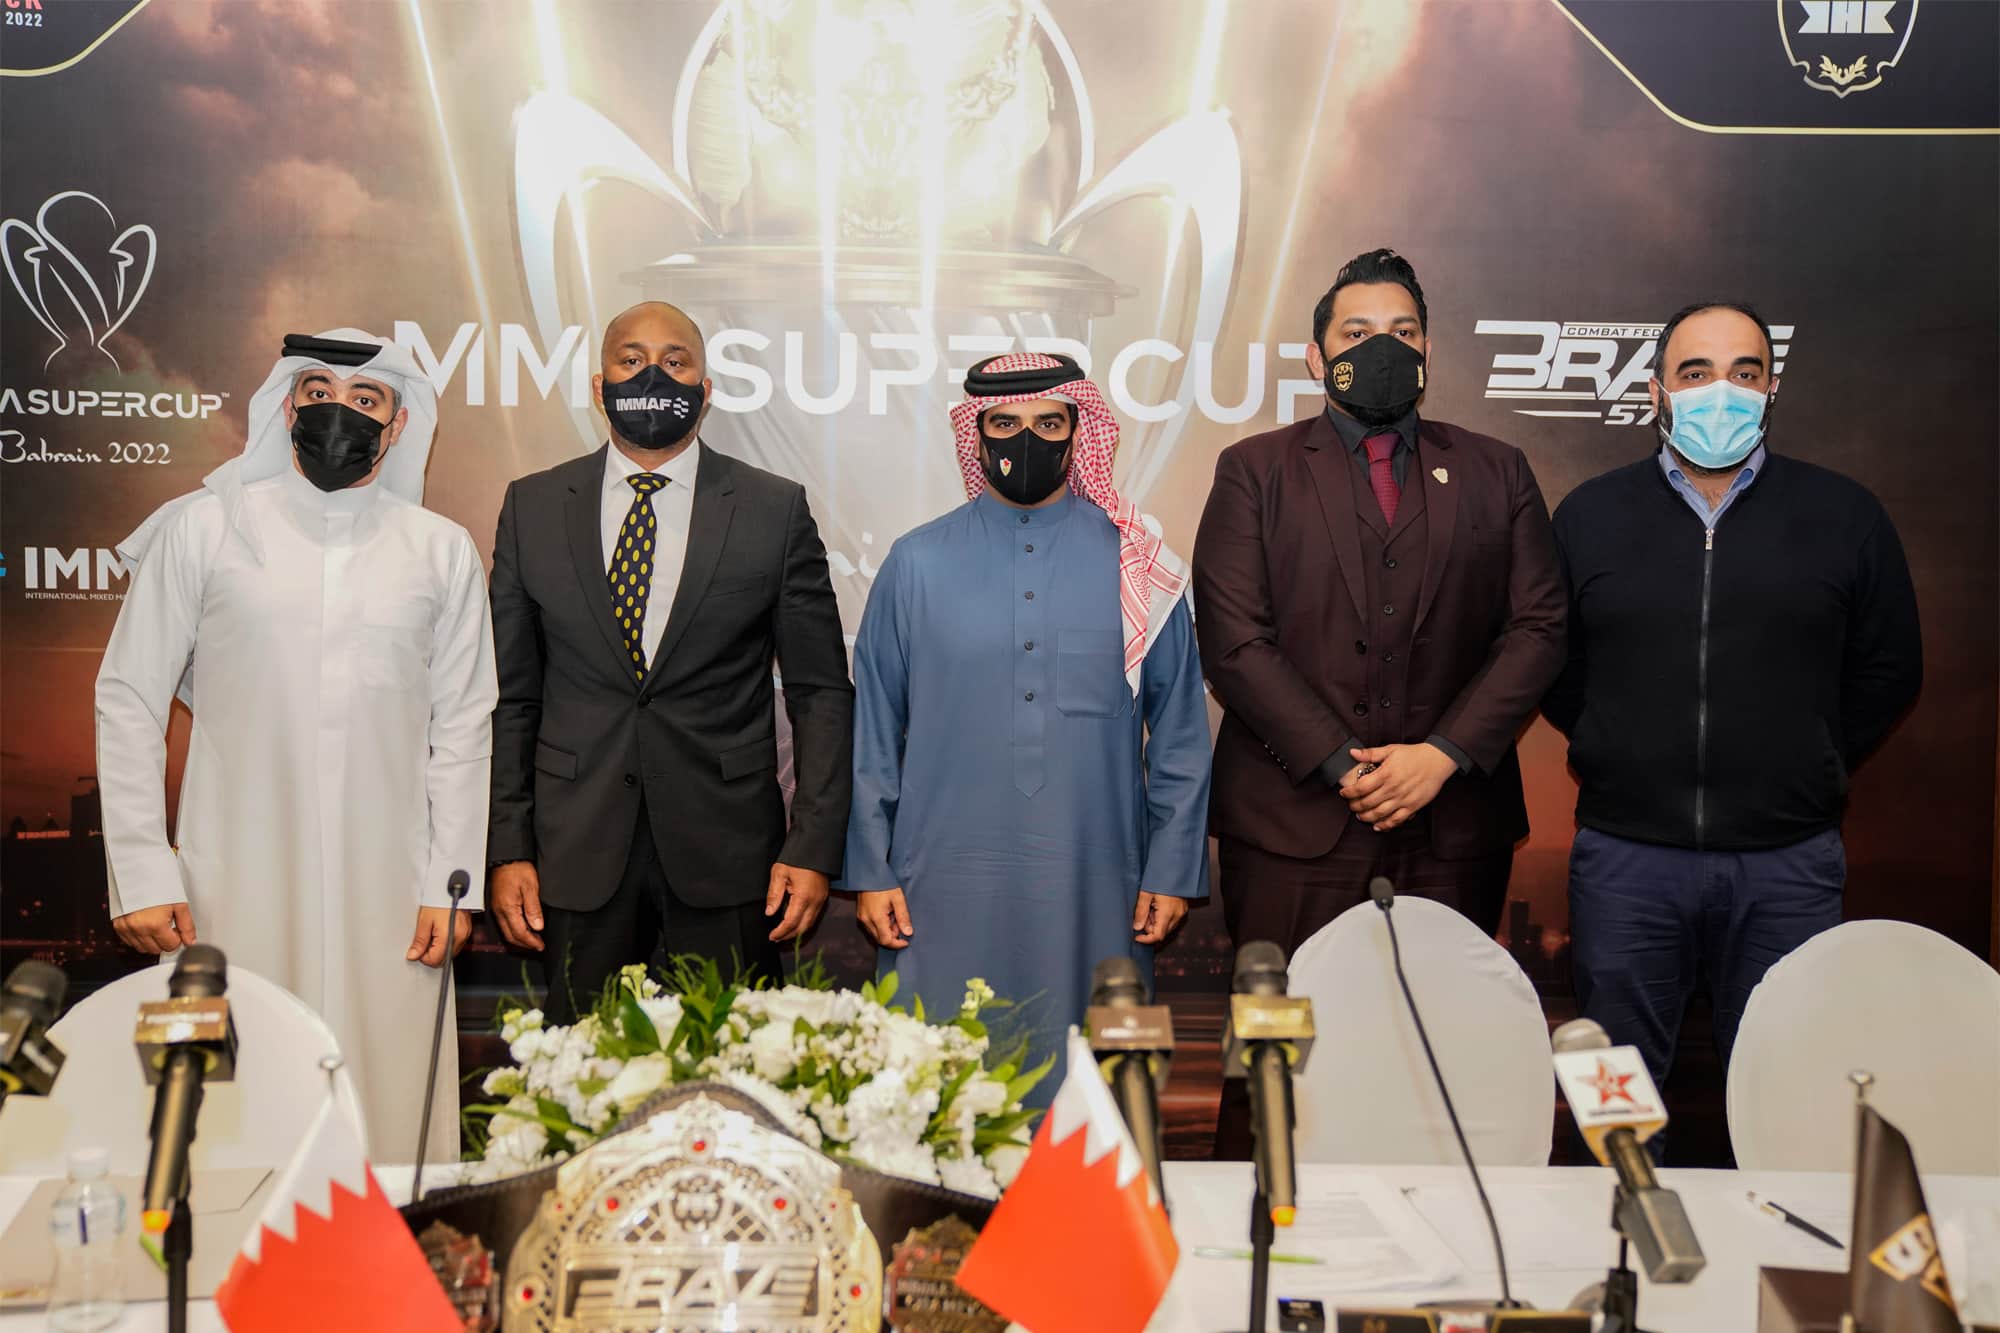 BRAVE CF launches IMMAF Nations ‘MMA Super Cup’